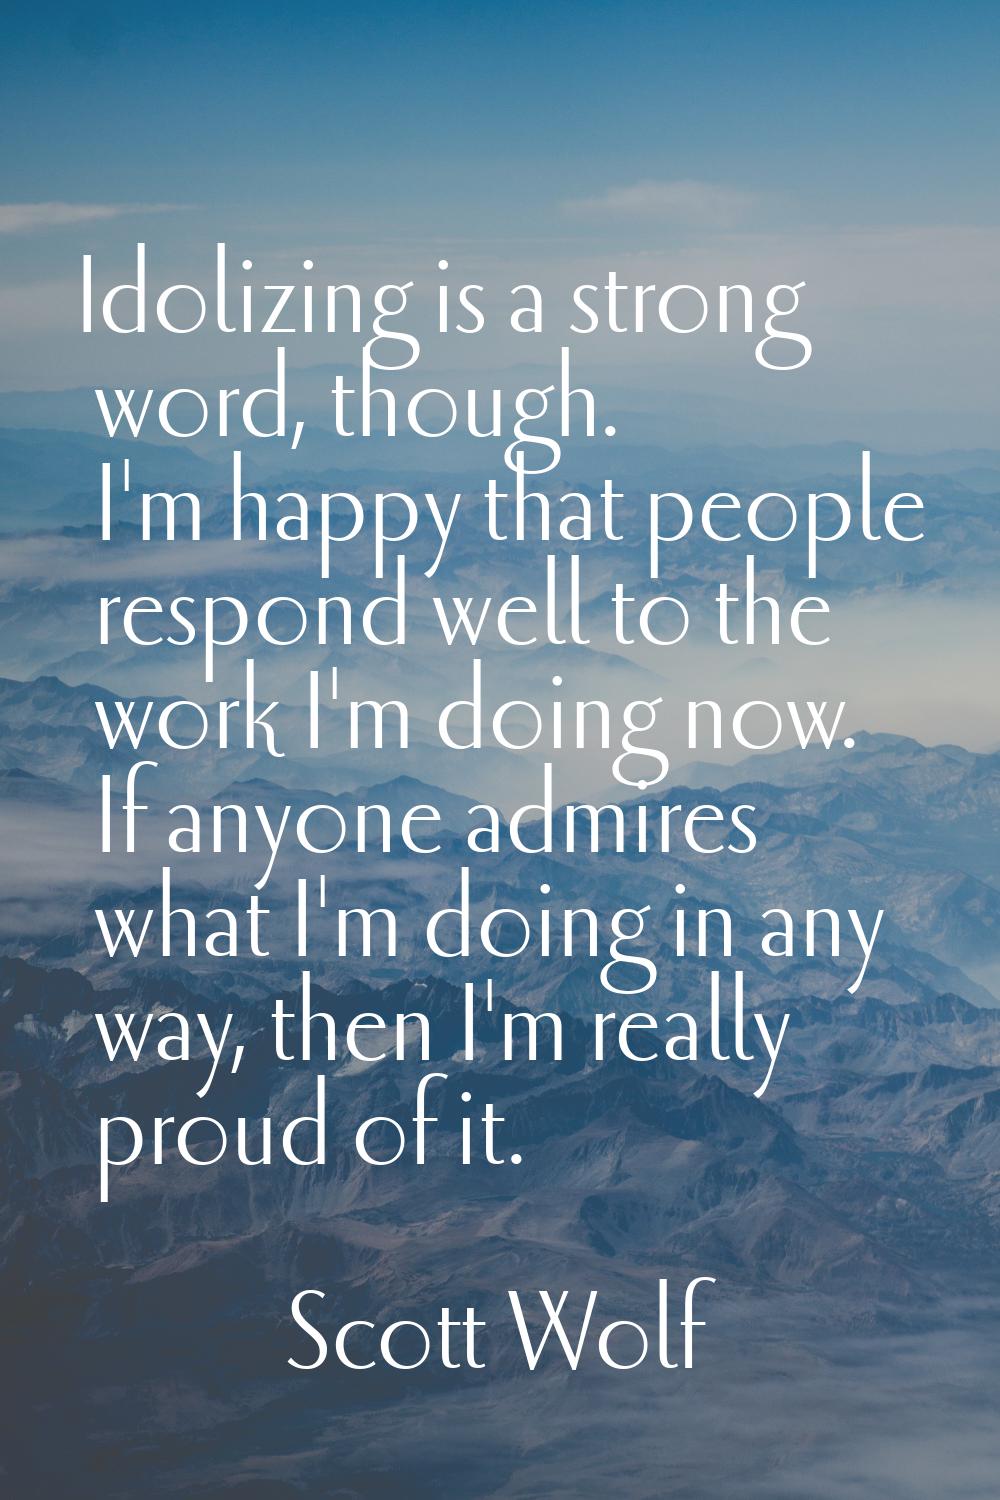 Idolizing is a strong word, though. I'm happy that people respond well to the work I'm doing now. I